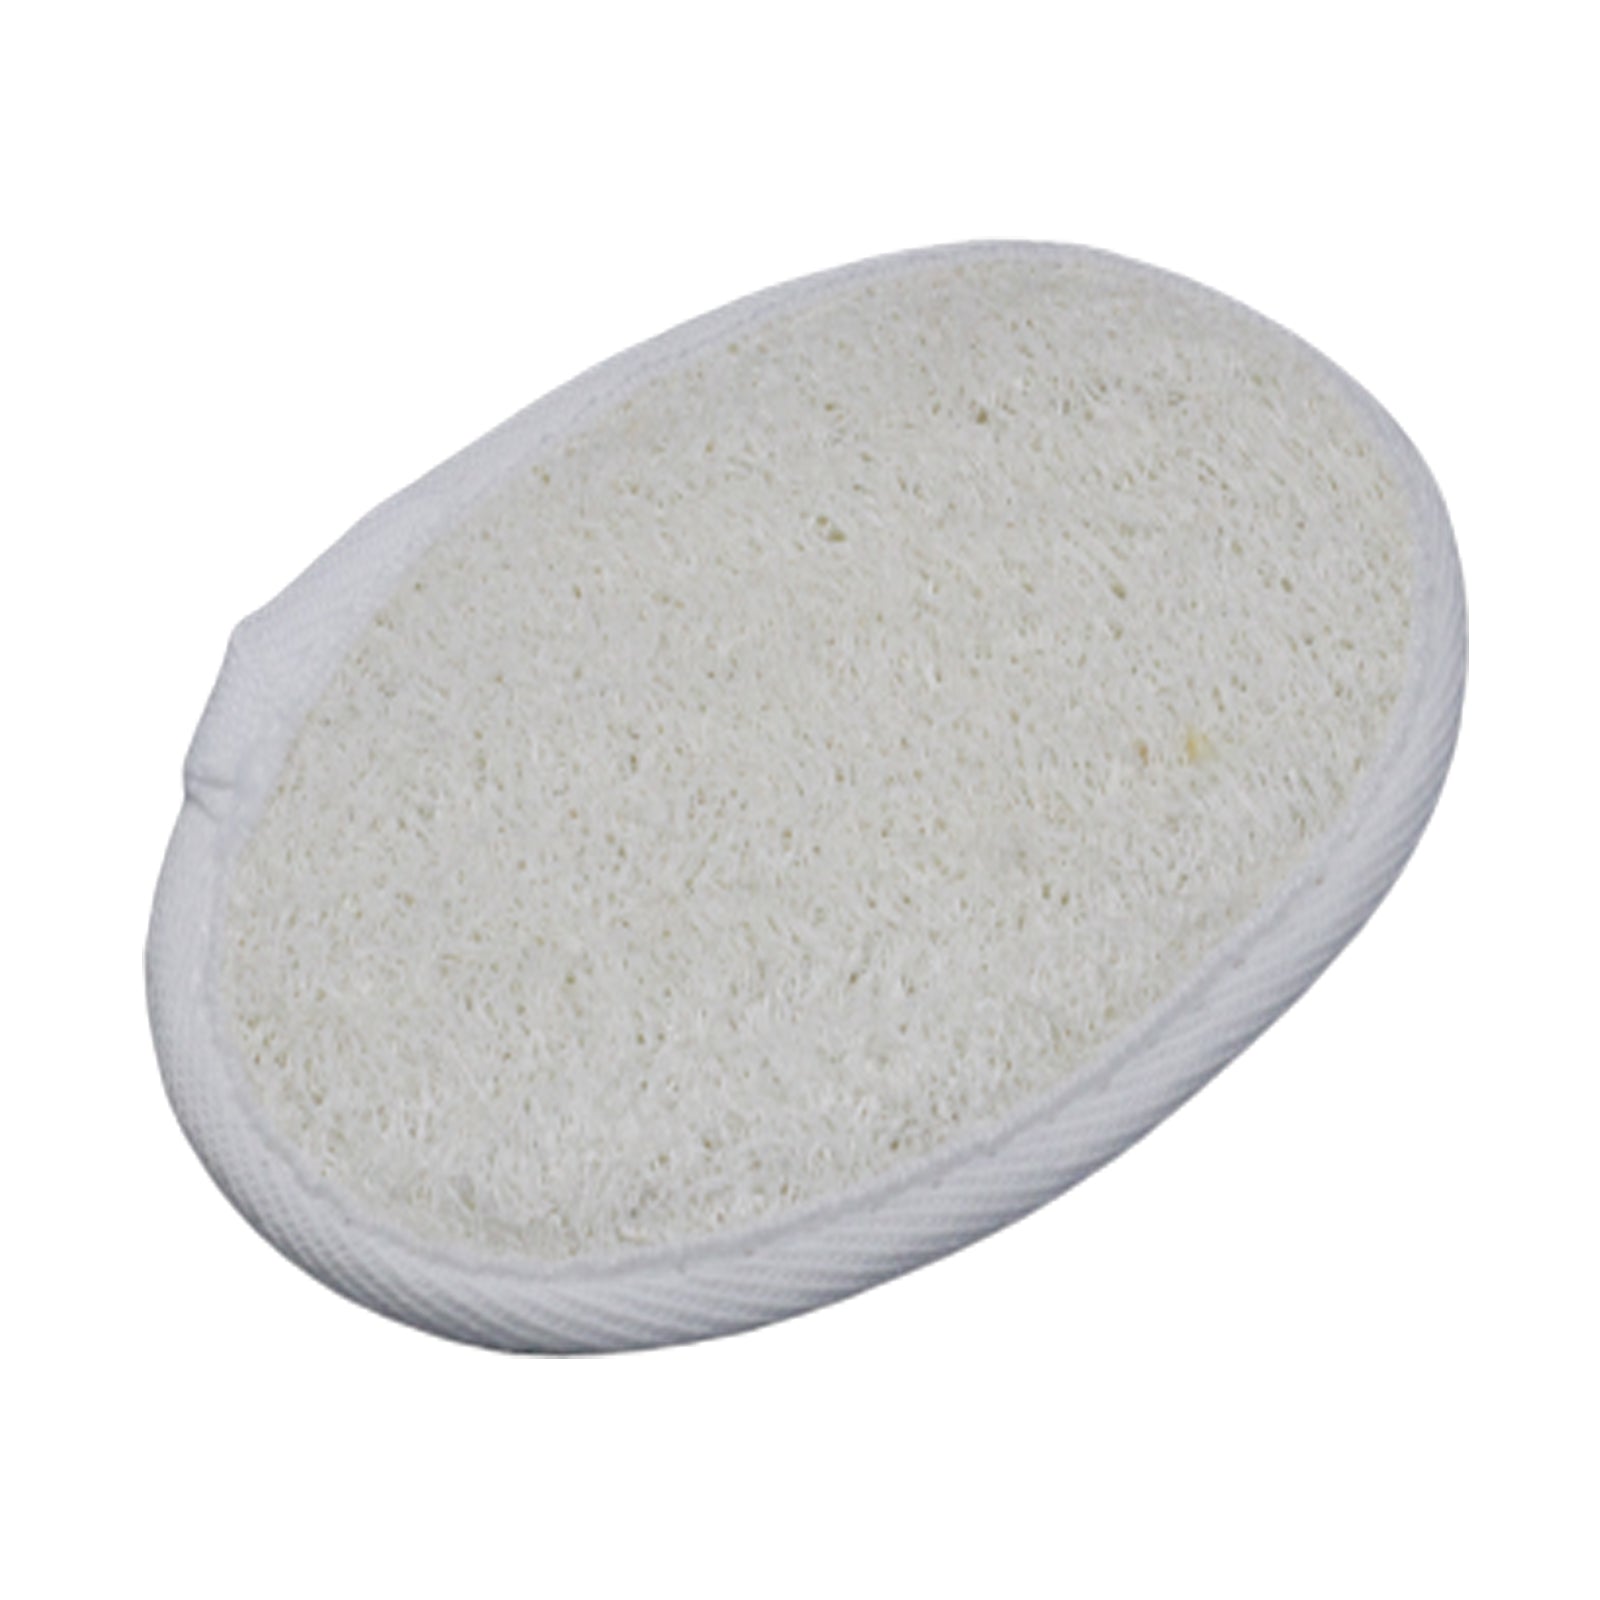 View Natural Loofah Body Scrubs Oval information